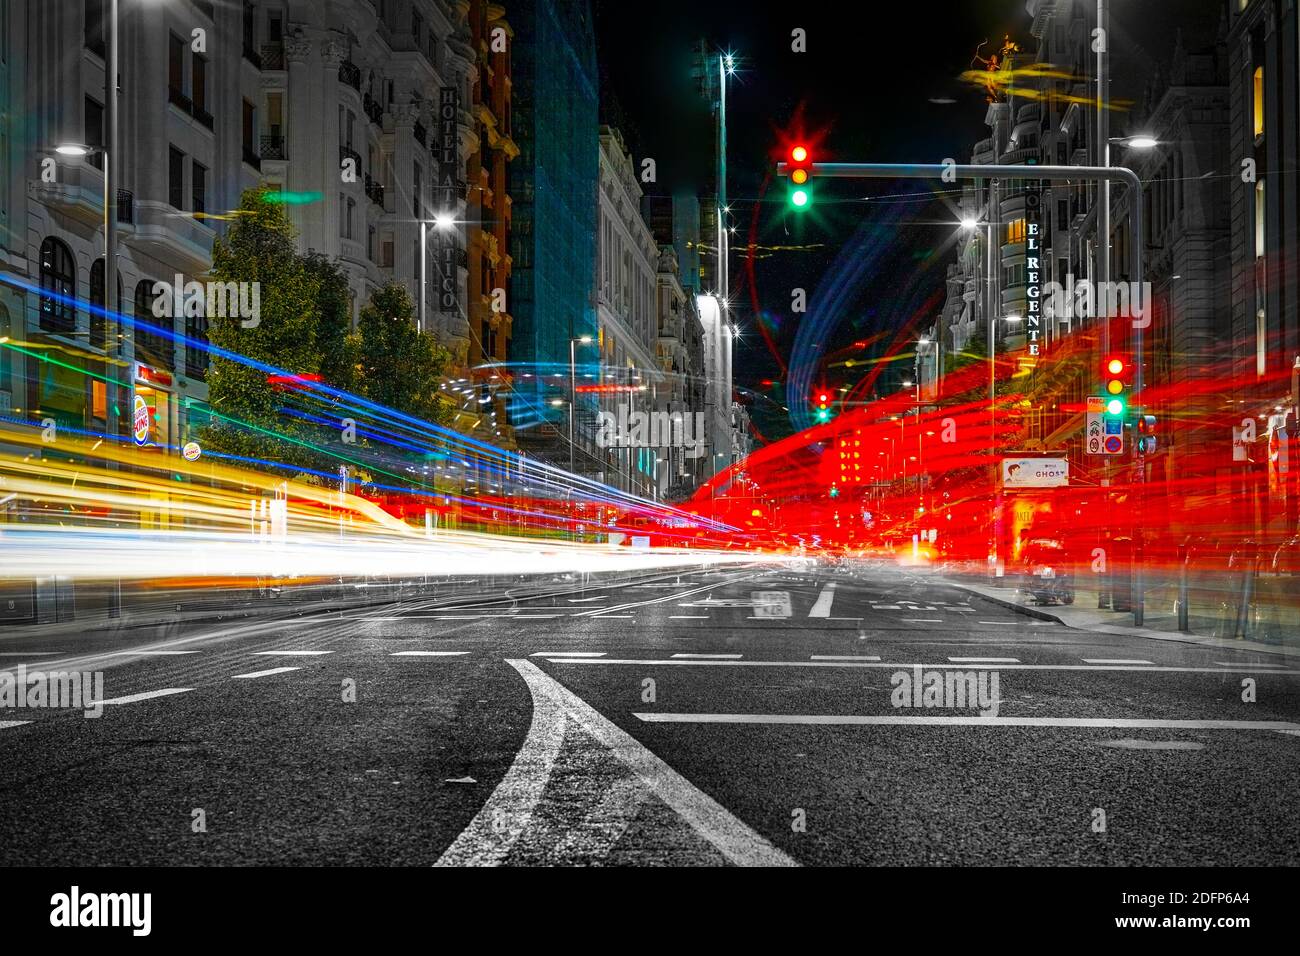 Madrid, Spain - September 27, 2020: -Long exposure night photography of Gran Via street in Madrid. Trails of lights from cars and traffic lights. Stock Photo